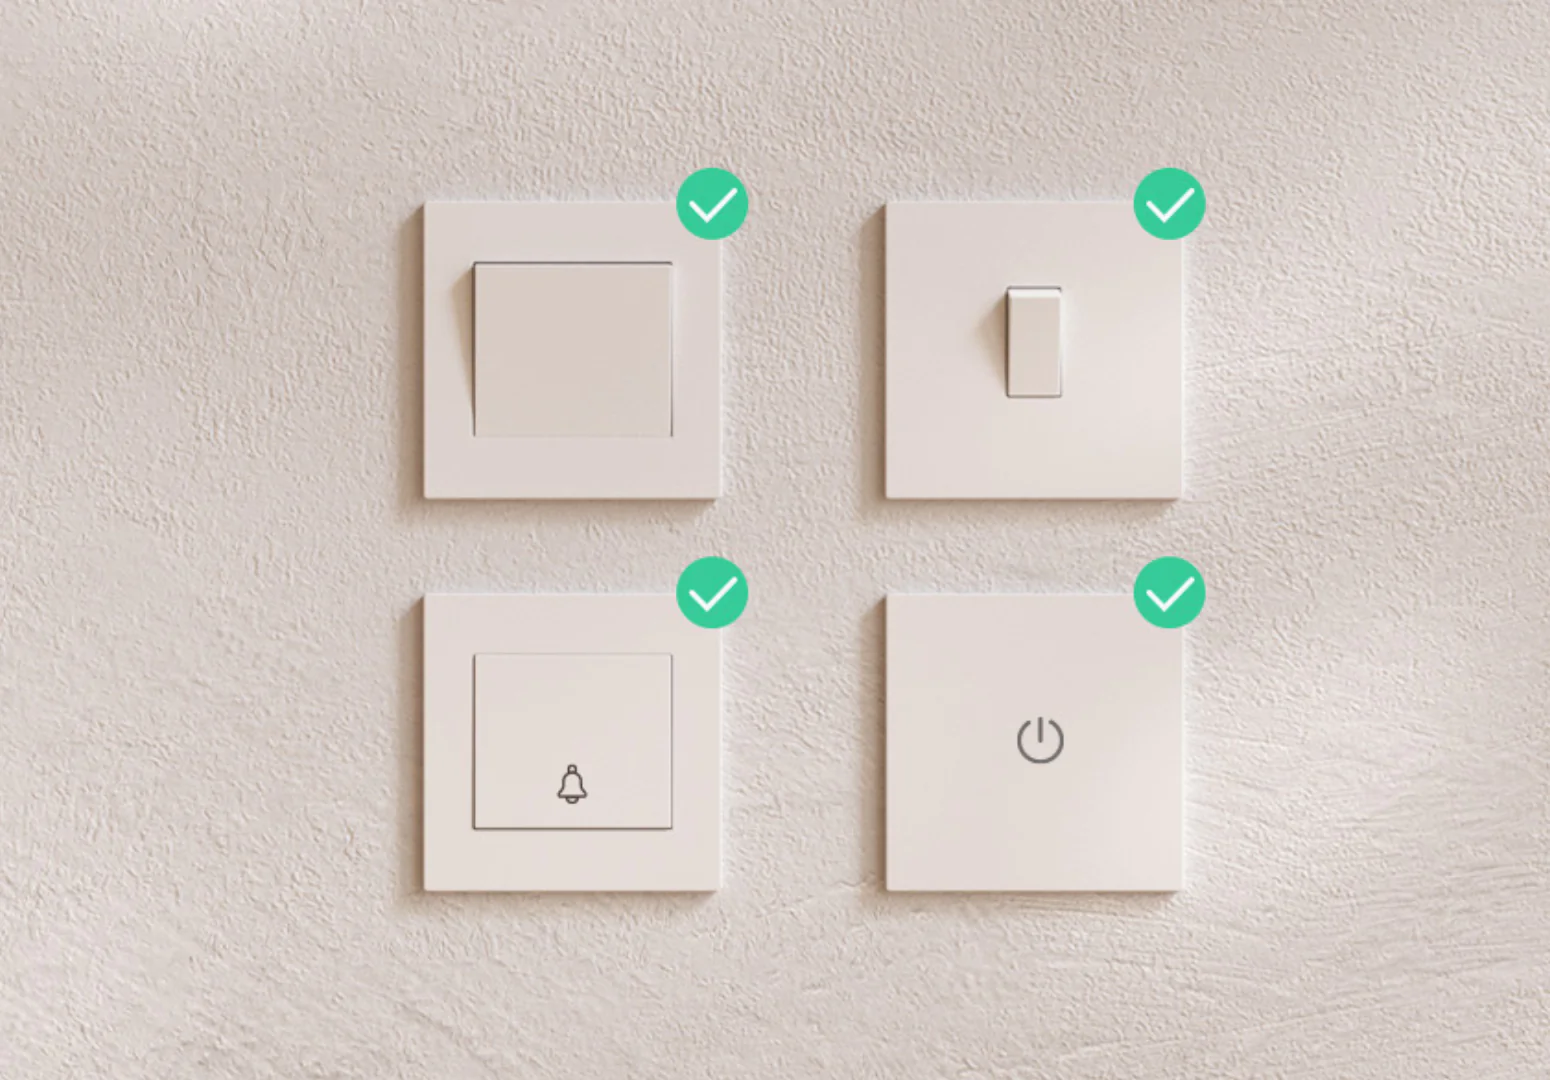 2 1679454088701 Meross 3 Way Smart Switch, Smart Light Switch Supports Apple HomeKit, Siri, Alexa, Google Assistant & SmartThings, 2.4GHz WiFi Light Switch Neutral Wire Required, Remote Control Timer 1 Pack